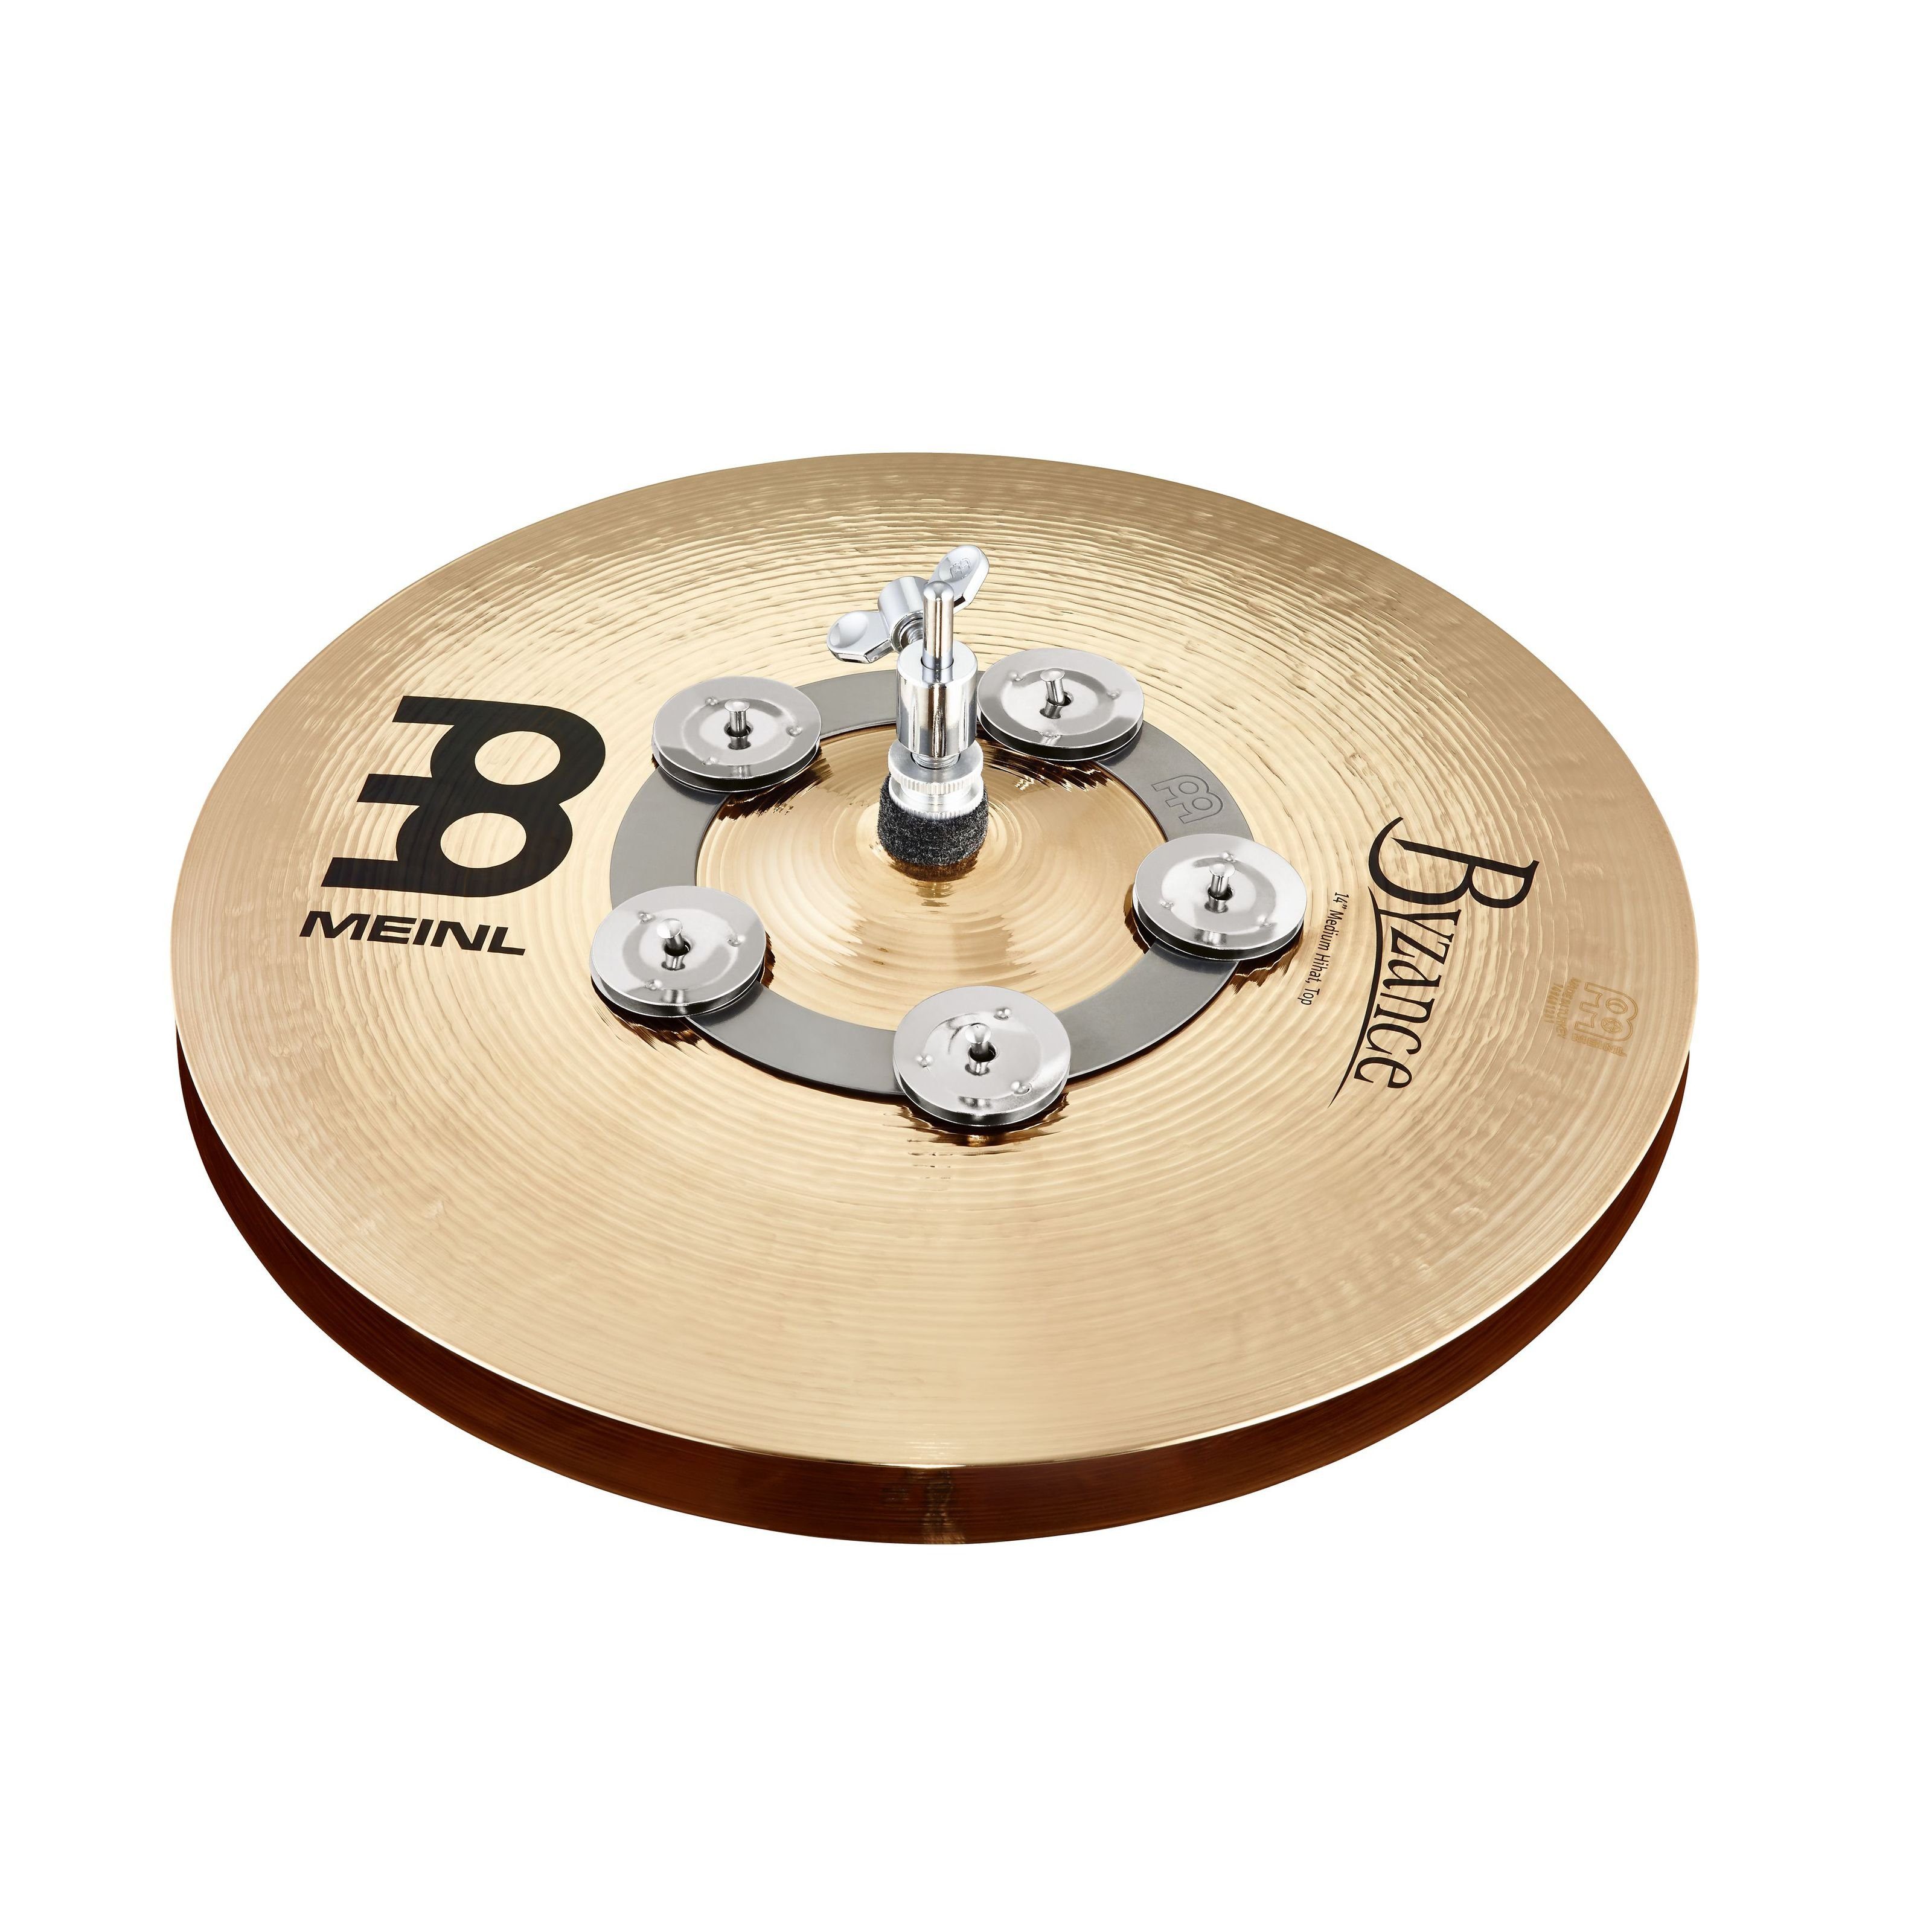 Ring Meinl - Ching Tambourine Percussion CRING, Spielzeug-Musikinstrument, 6"